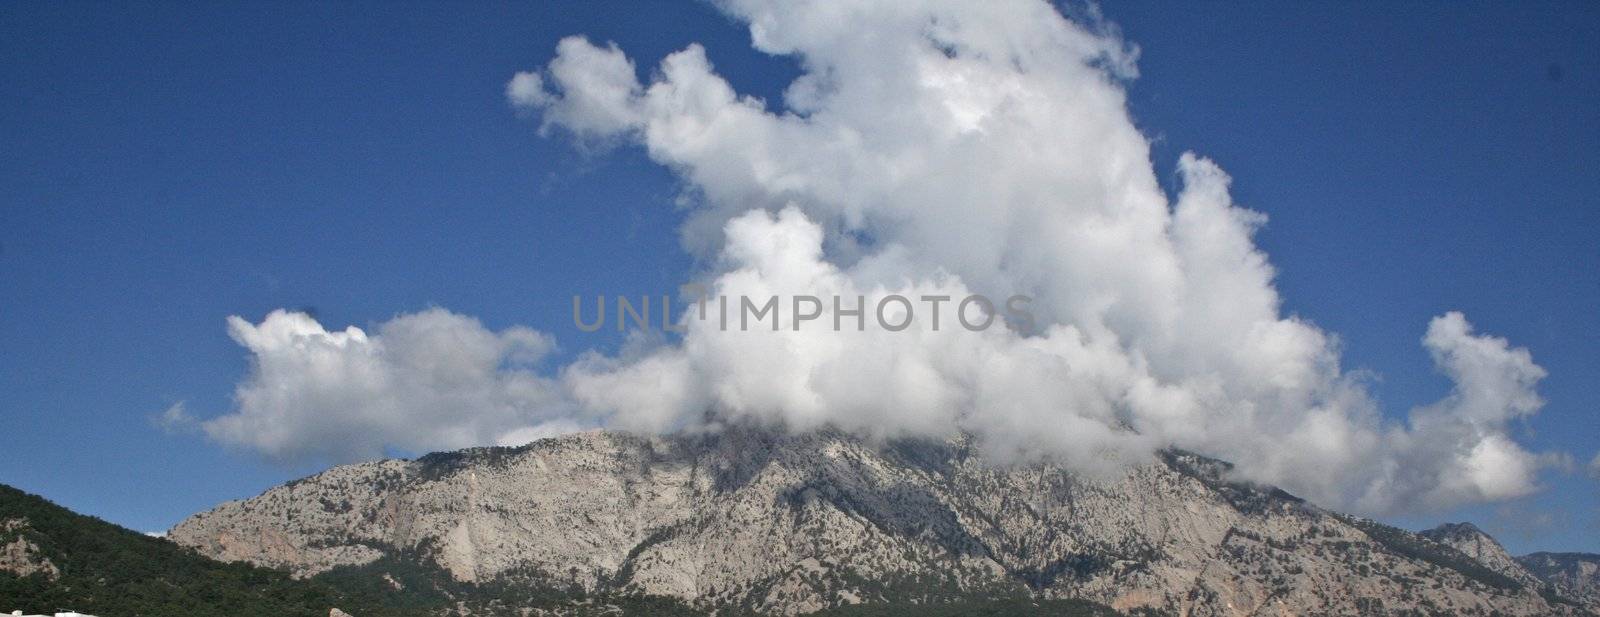 Mountains in clouds background nature texture close up